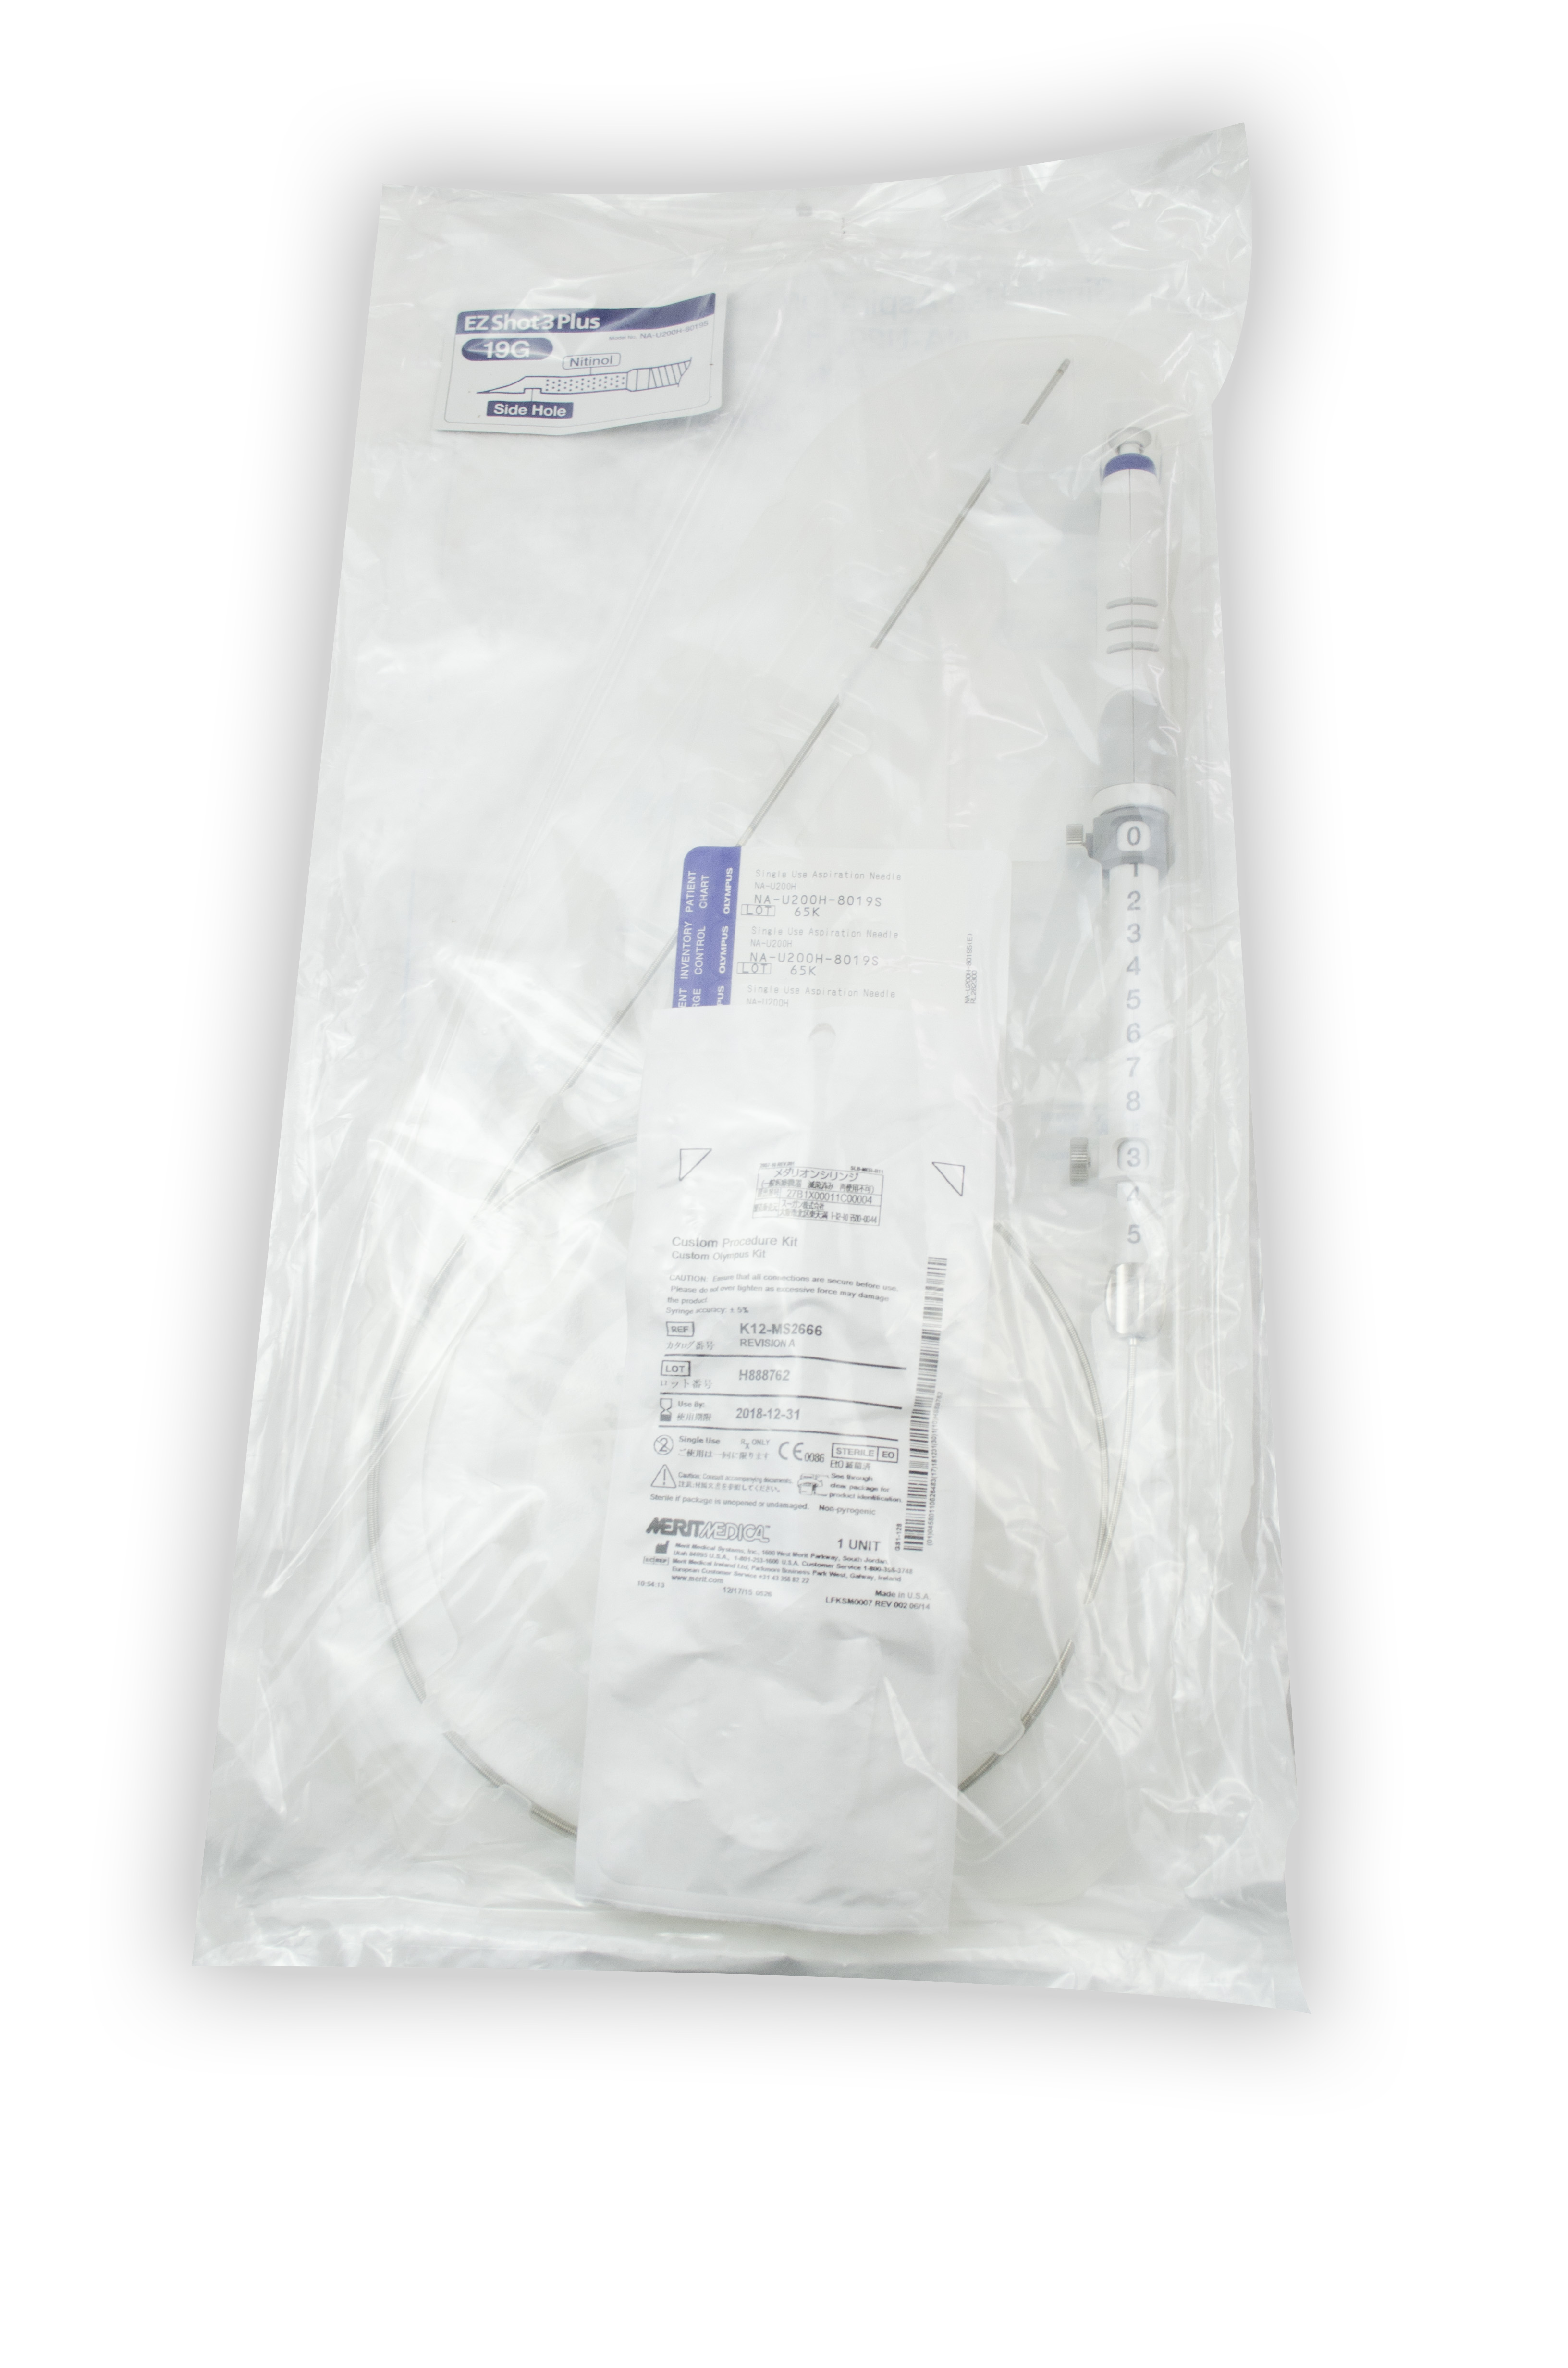 [Out-of-Date] Olympus Disposable Aspiration Needle (2.8 mm x 1400 mm) - NA-U200H-8019S (Original Packaging)